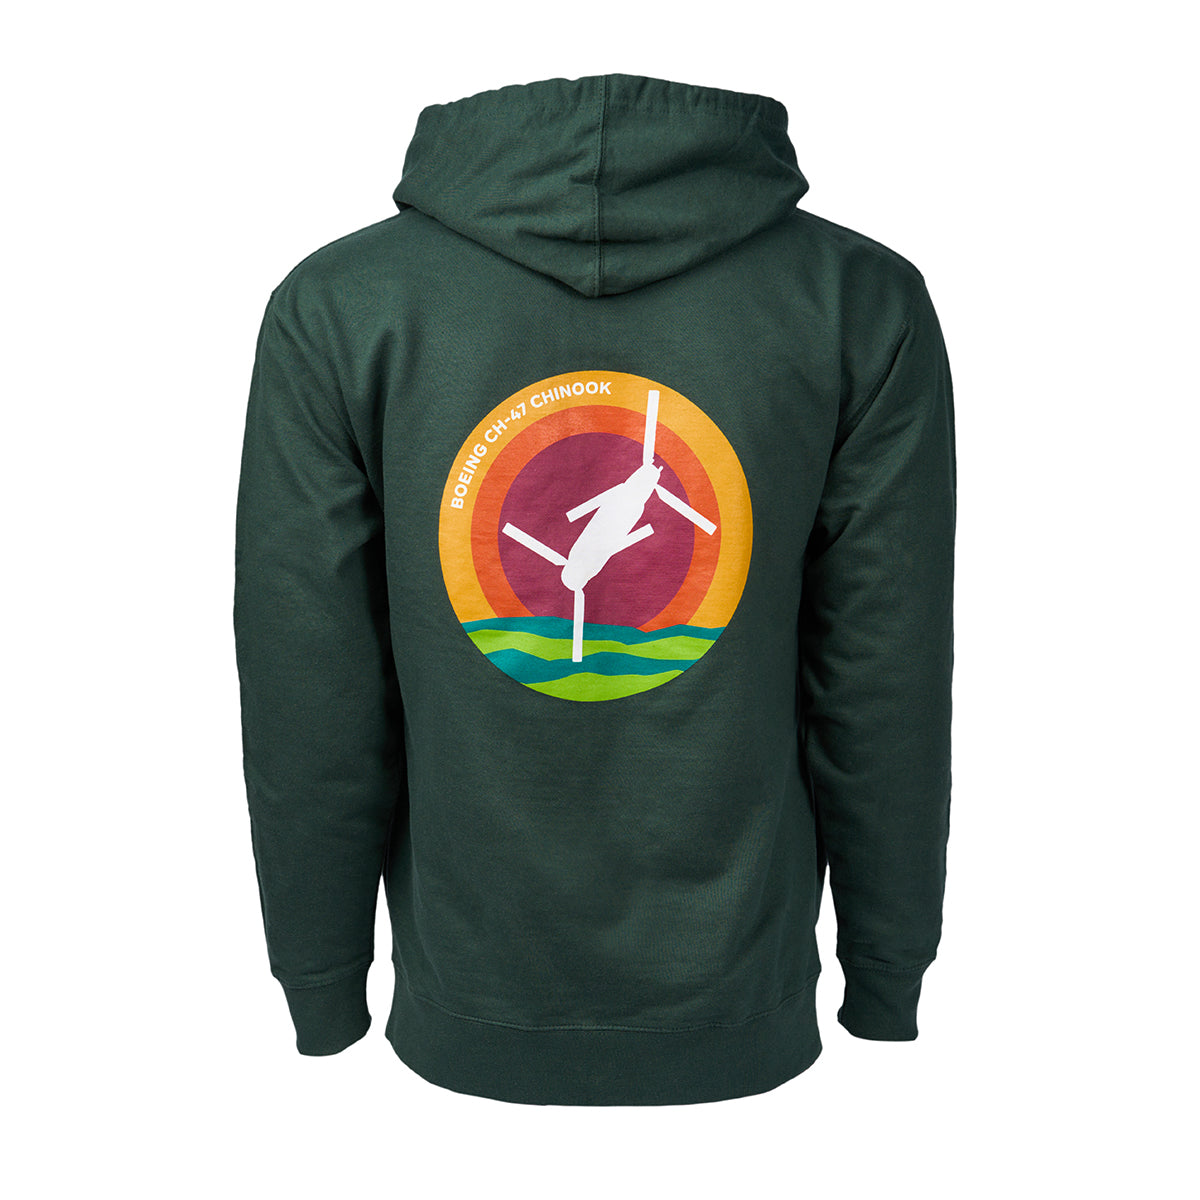 Full product image of the back side of the hooded sweatshirt in a dark green color.  Showing the Skyward graphic of the Boeing CH-47 Chinook.